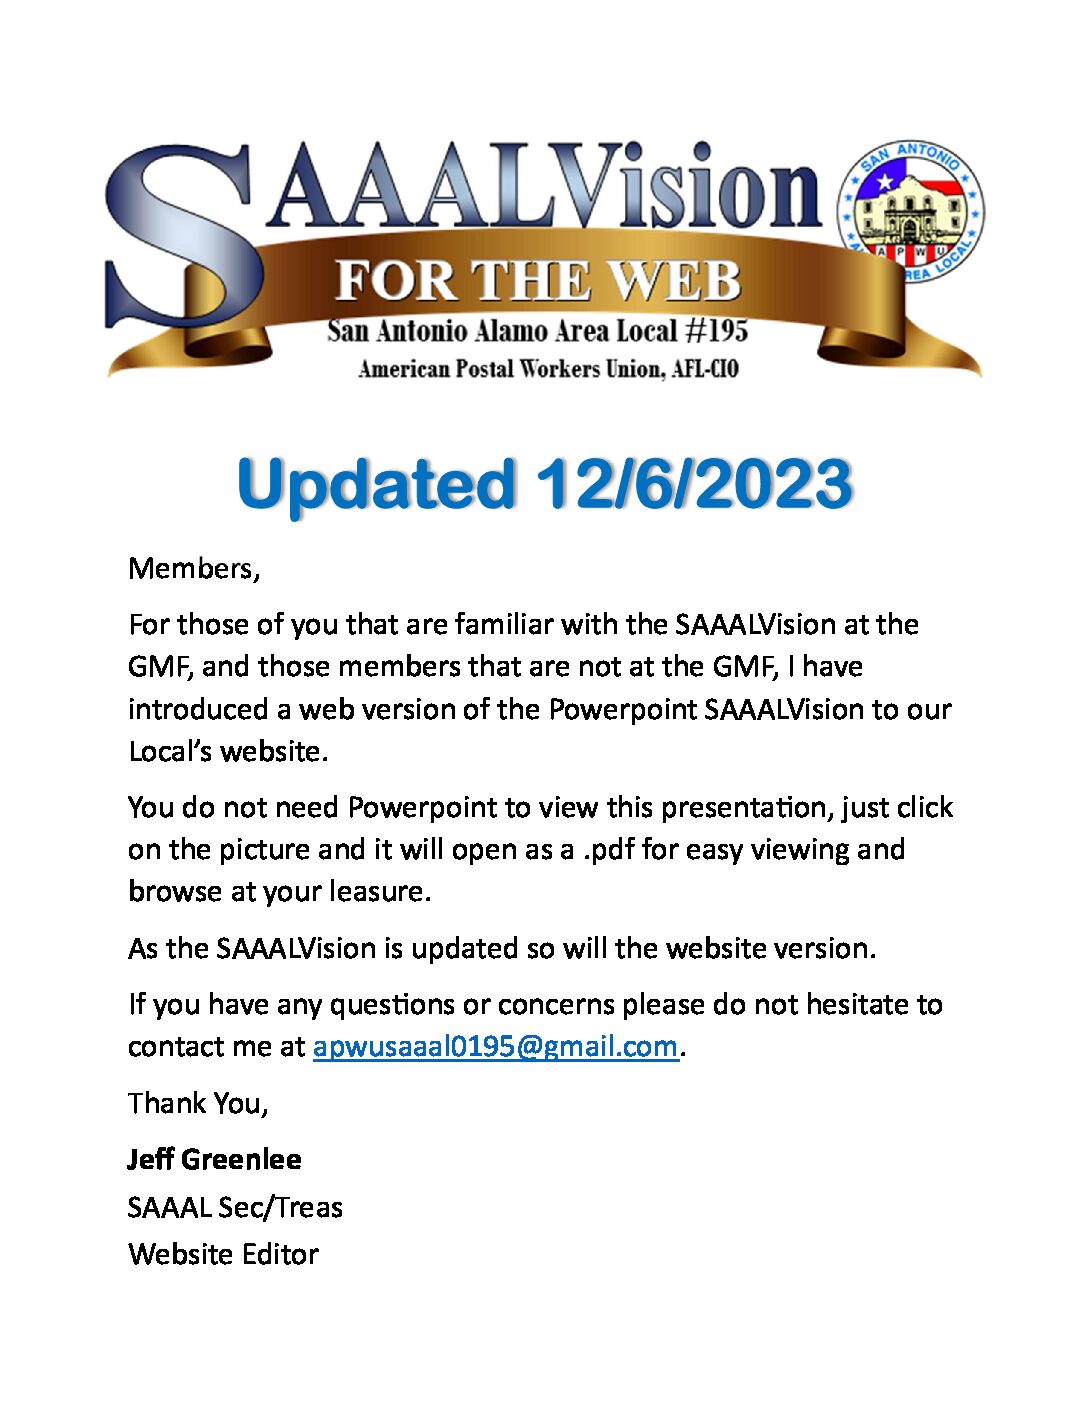 SAAALVision for the Web Updated 12/6/2023 - 